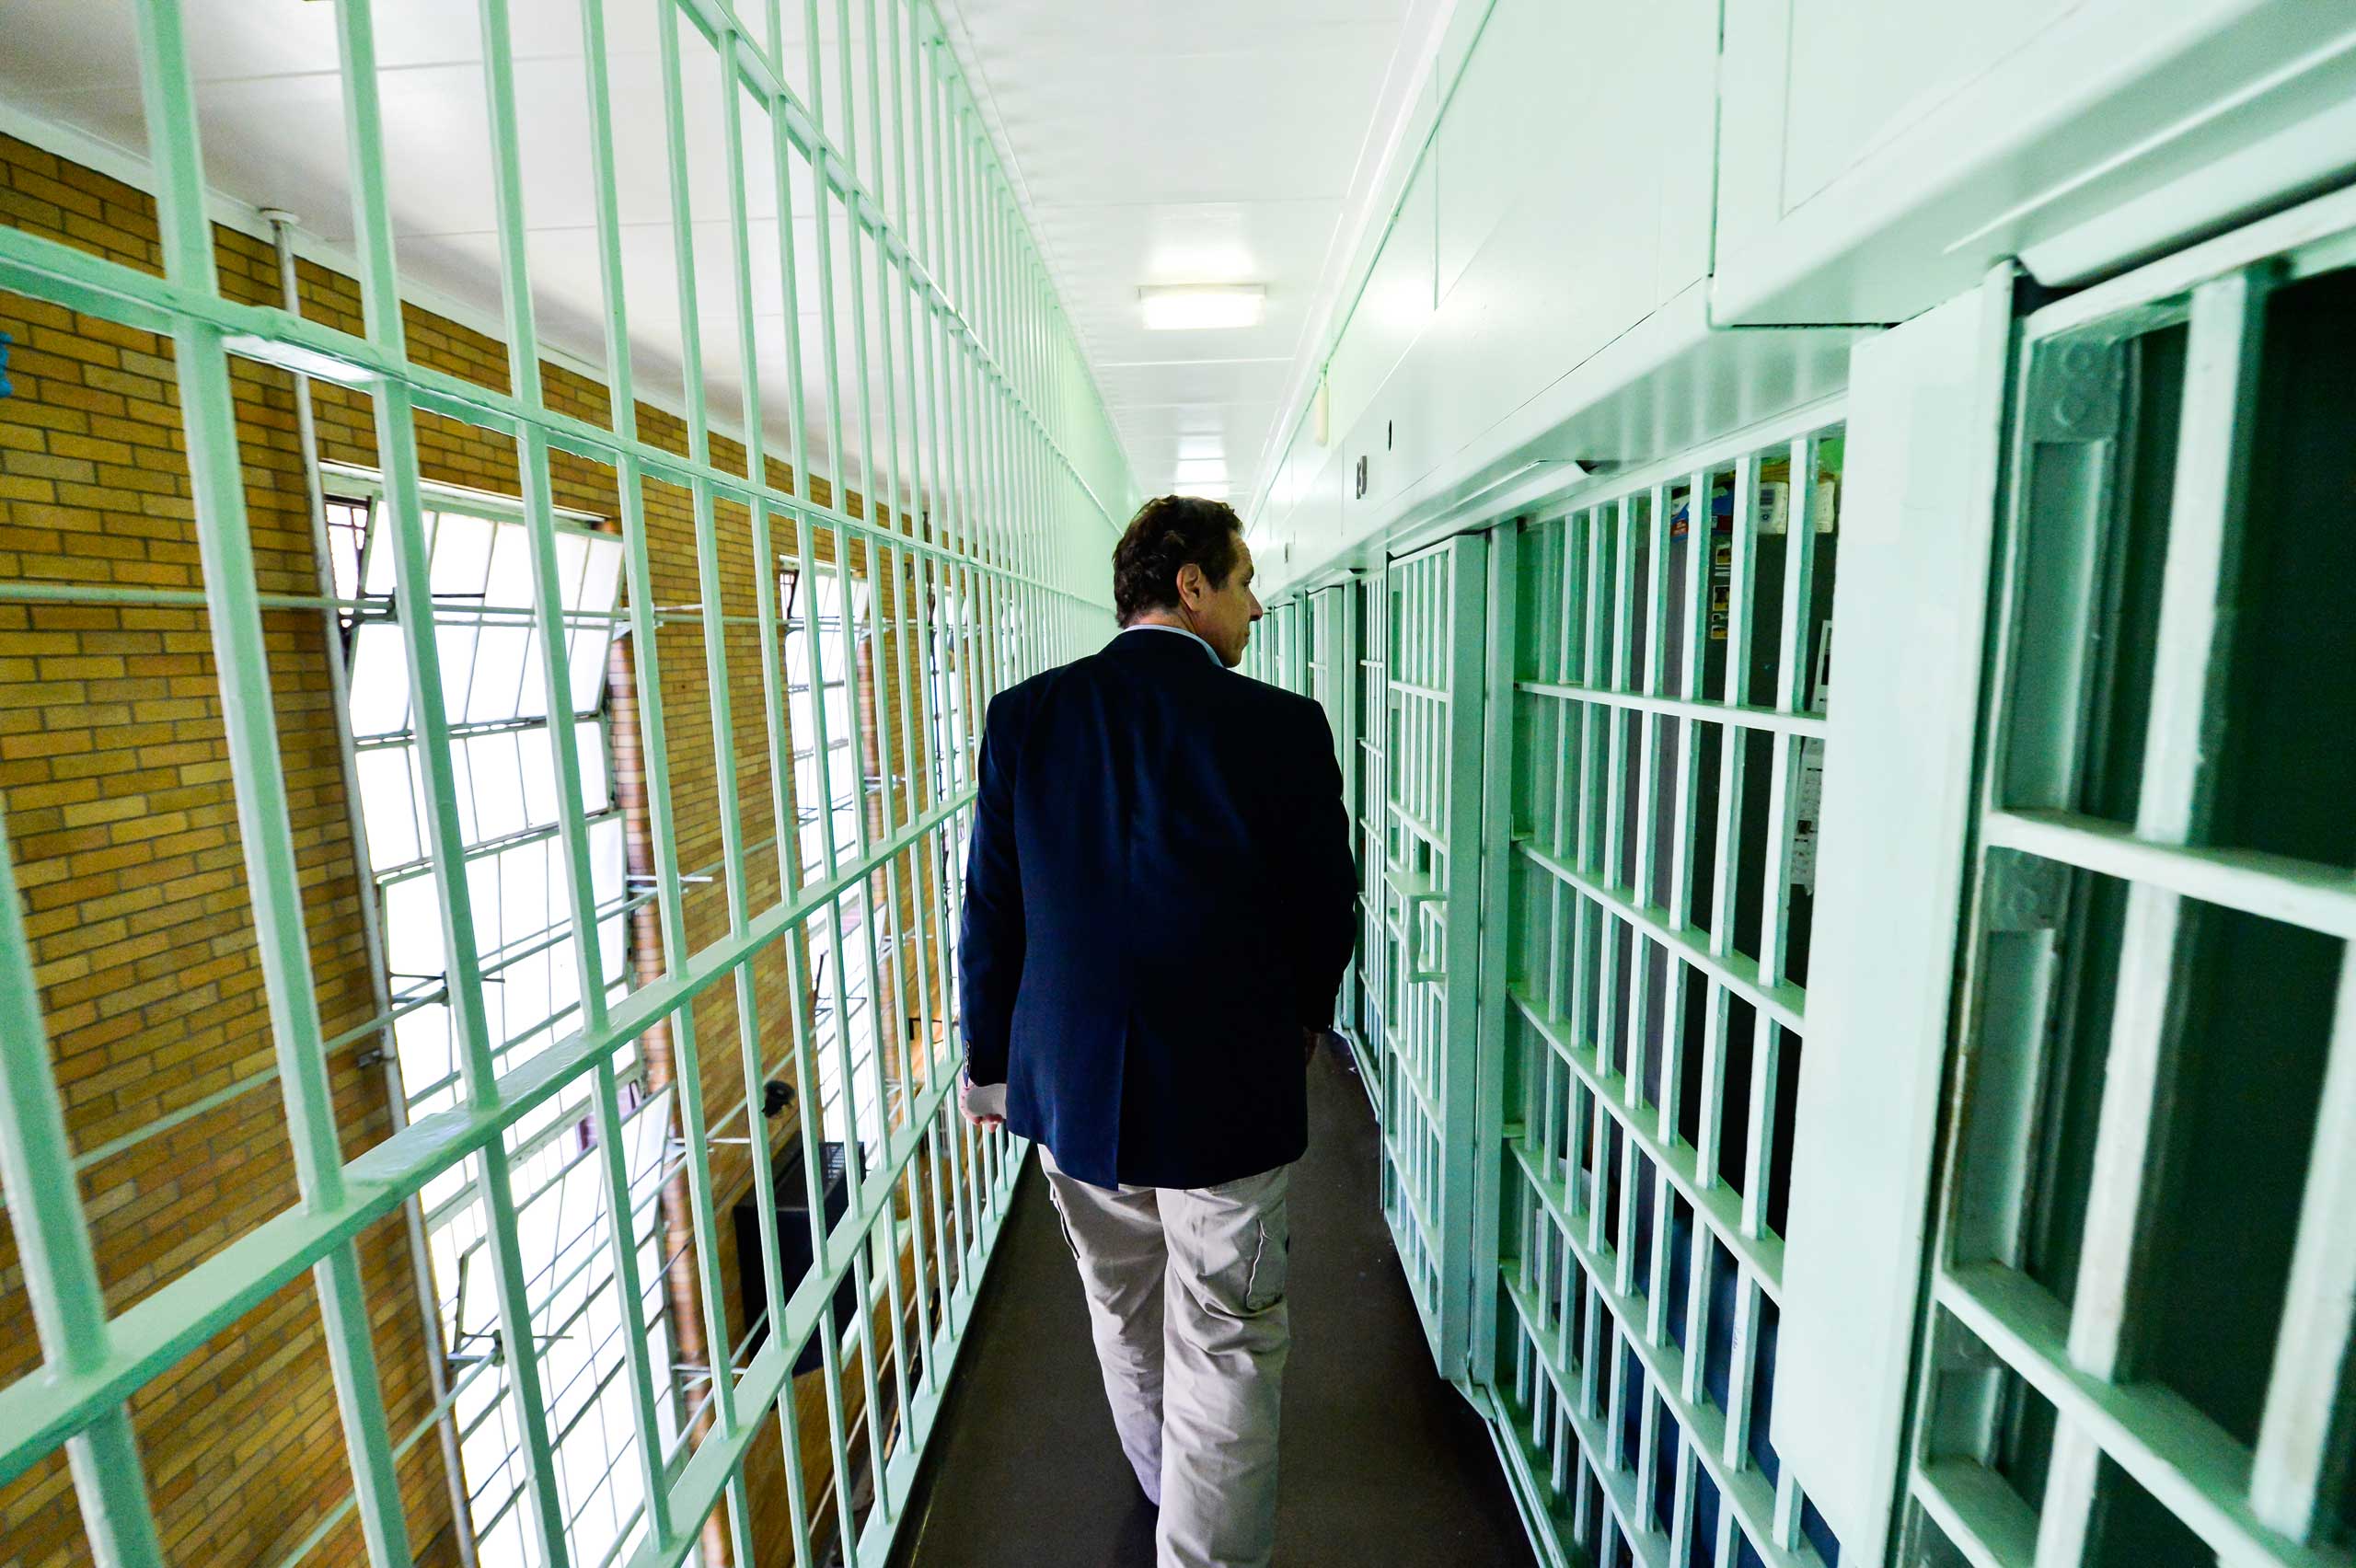 Gov. Andrew Cuomo tours the Clinton Correctional Facility, where two inmates escaped on Saturday, in Dannemora, N.Y. on June 6, 2015.